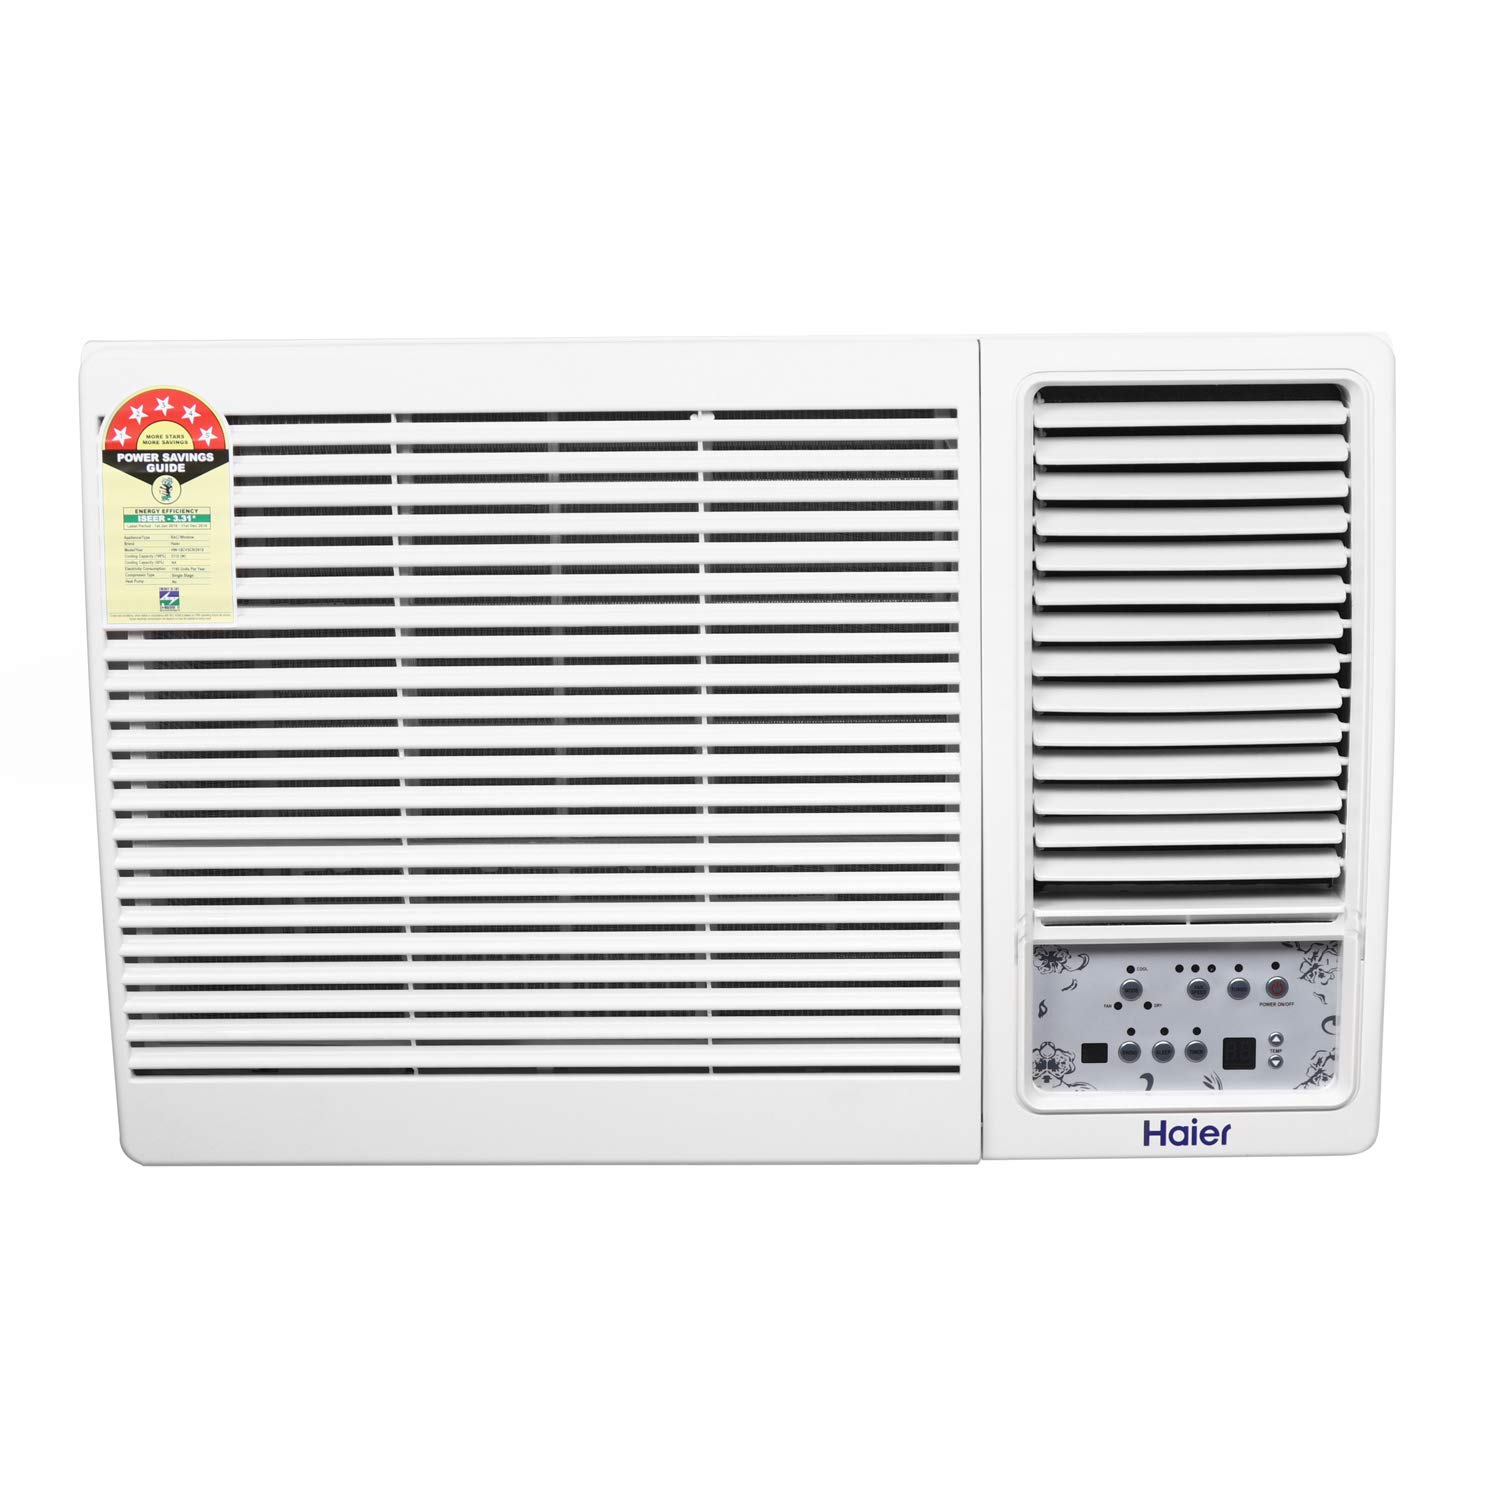 Windows AC: Economical and easy to install
Capacity: 1.5 Ton. Suitable for medium sized rooms (111 to 150 sq ft)
Energy Rating: 5 Star. Best in class efficiency. Annual Energy Consumption: 1154.73 units. ISEER Value: 3.31 (Please refer energy label on product page or contact brand for more details)
Manufacturer Warranty : 1 year on product, 5 years on condenser, 5 years on compressor
Copper Condenser Coil: Better cooling and requires low maintenance
Special Features: Dust_Filter
Refrigerant gas: R22
Included in the box: AC Unit, Remote Control, User manual, Warranty Card